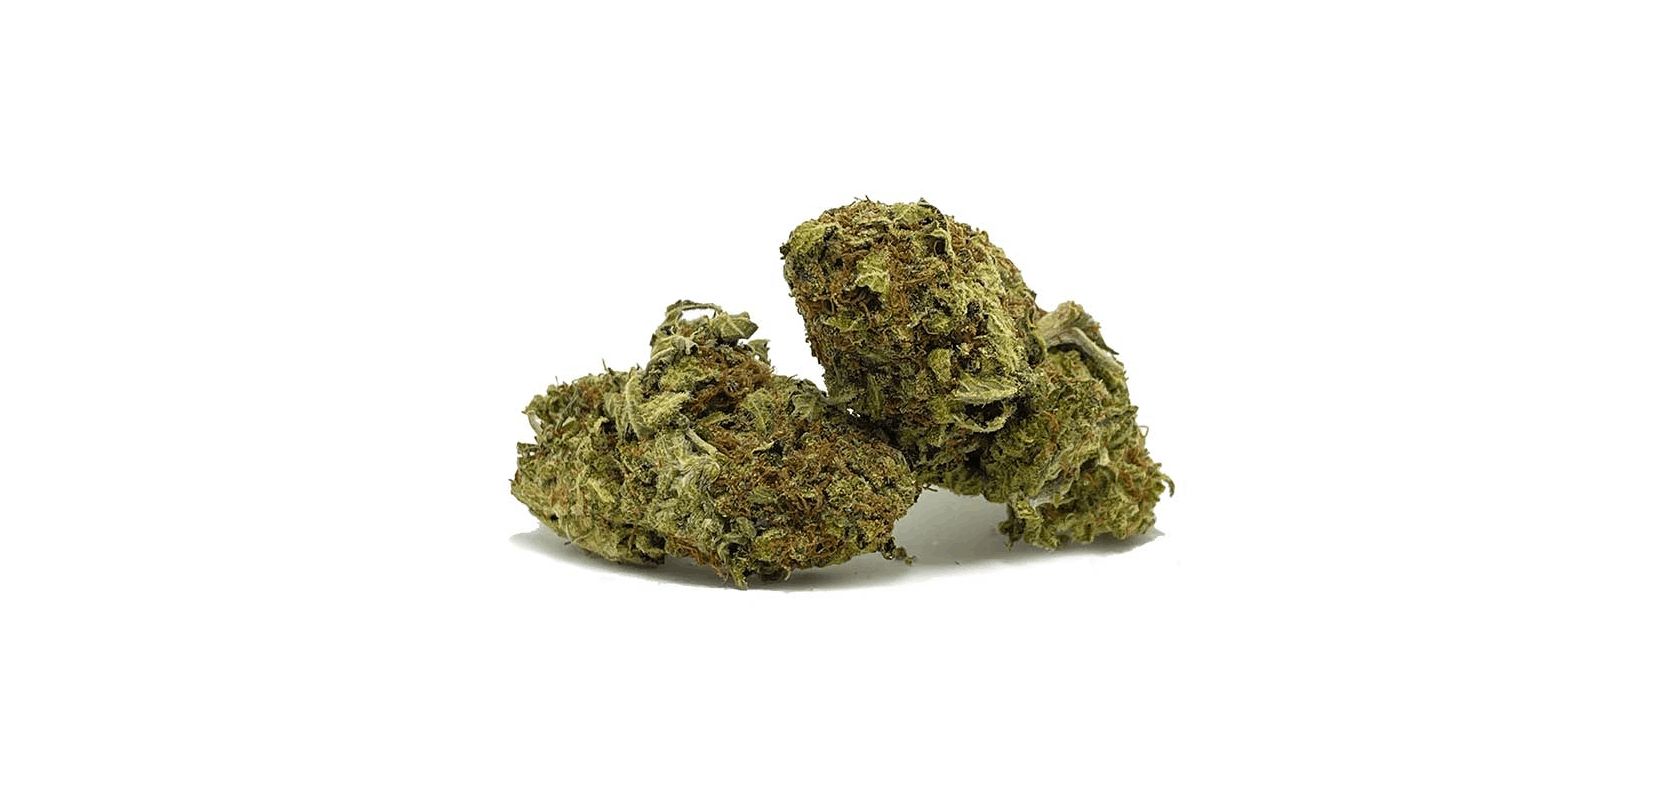 Now that you know how the Gorilla Bomb Strain makes you feel, where can you buy weed online for cheap without compromising on quality?